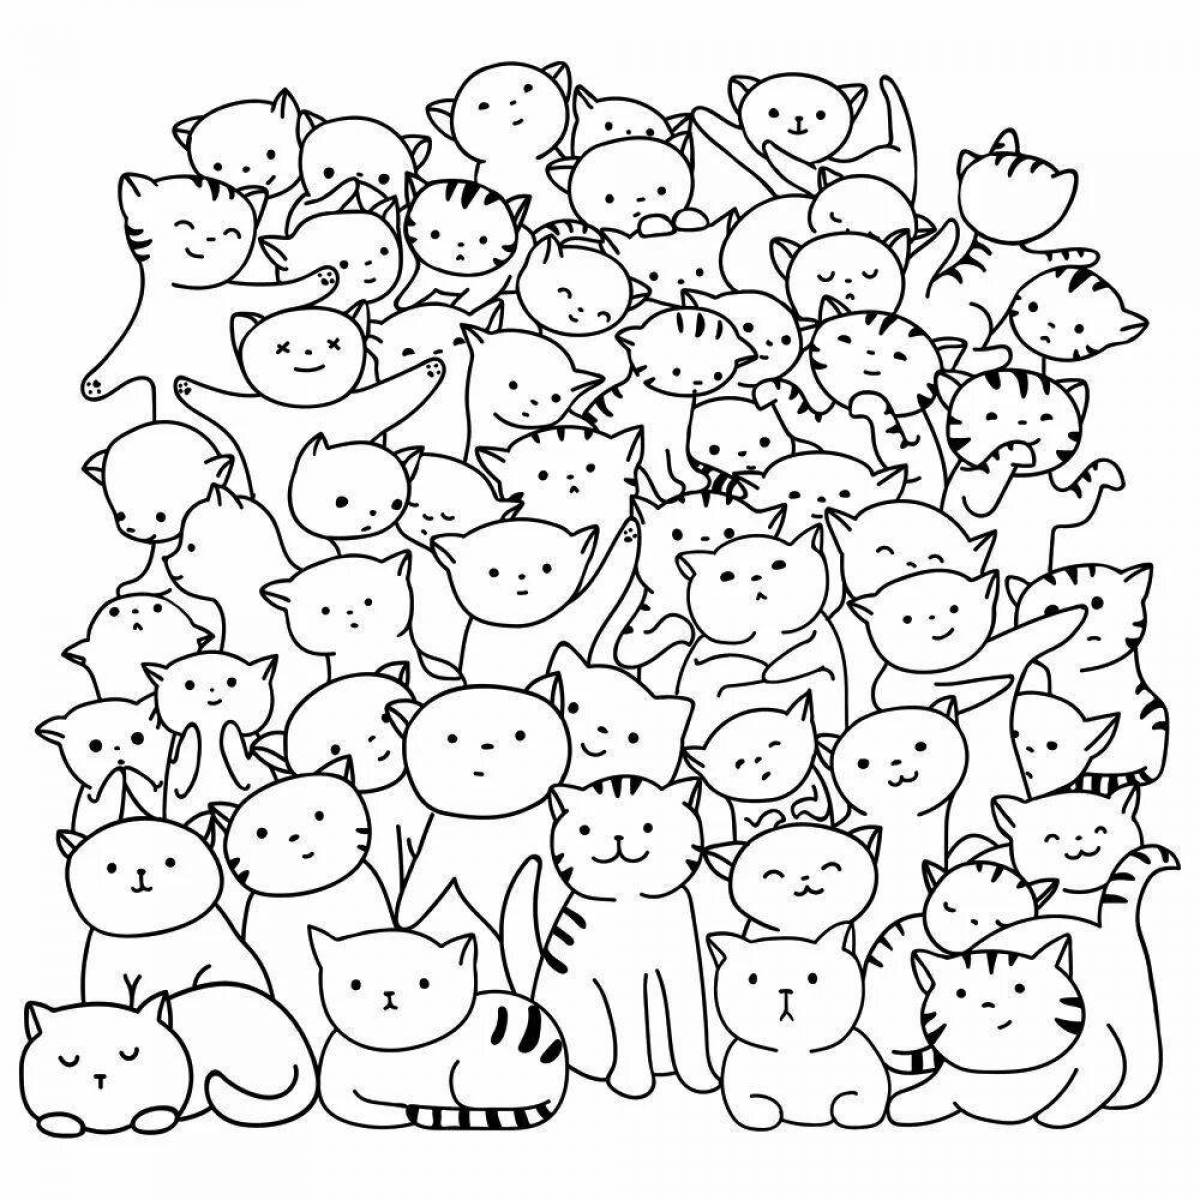 Colorful little cats coloring page